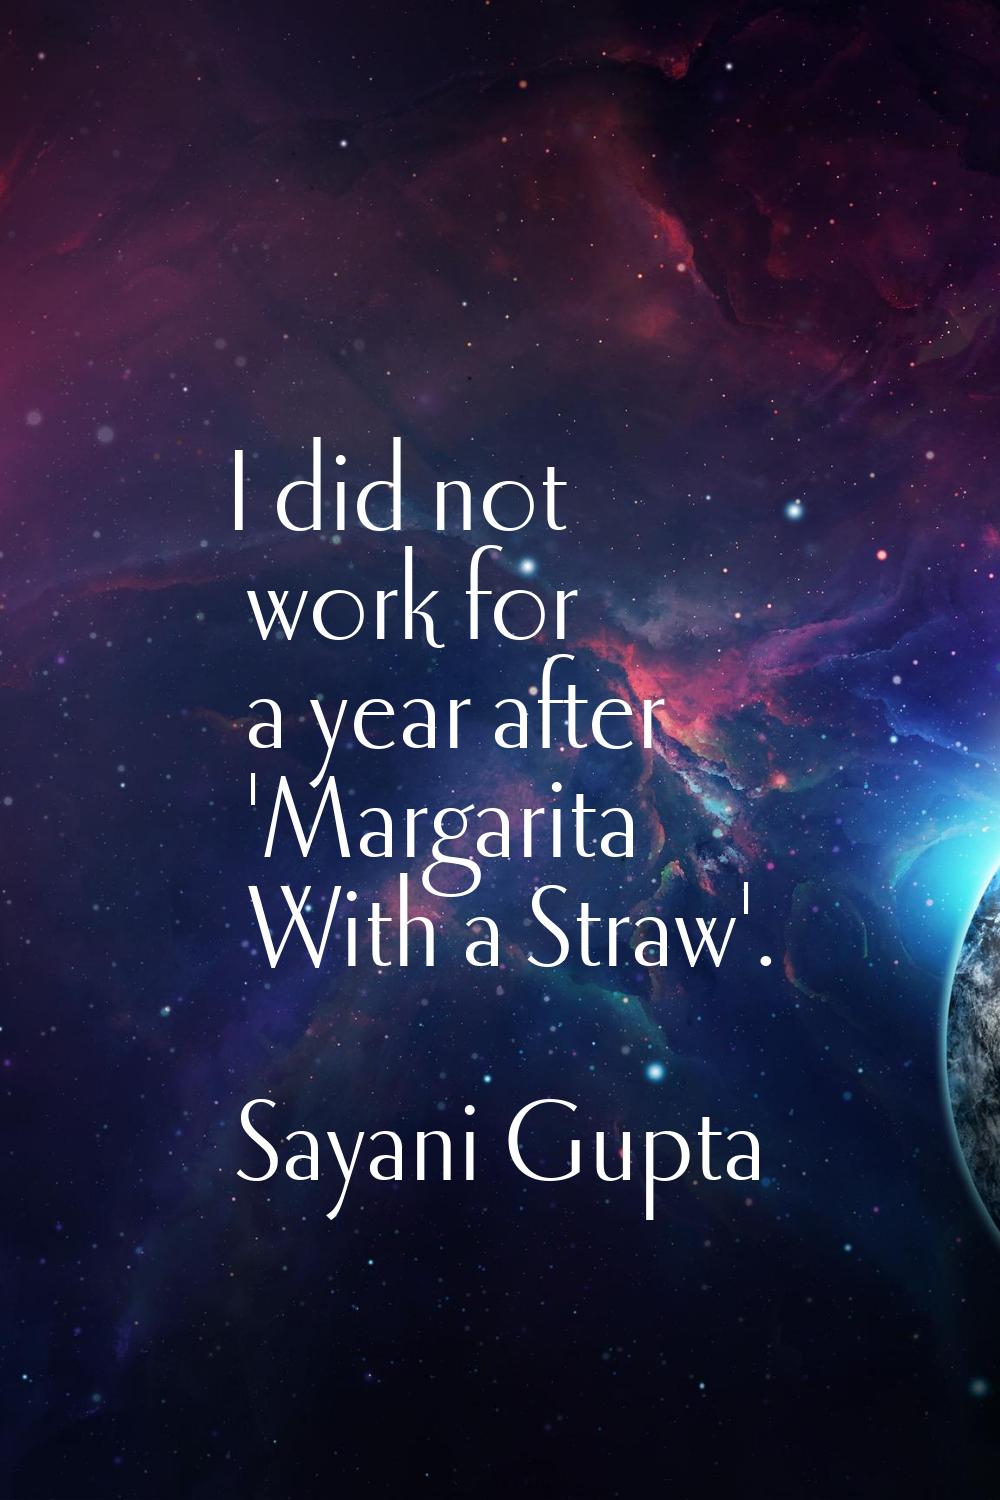 I did not work for a year after 'Margarita With a Straw'.